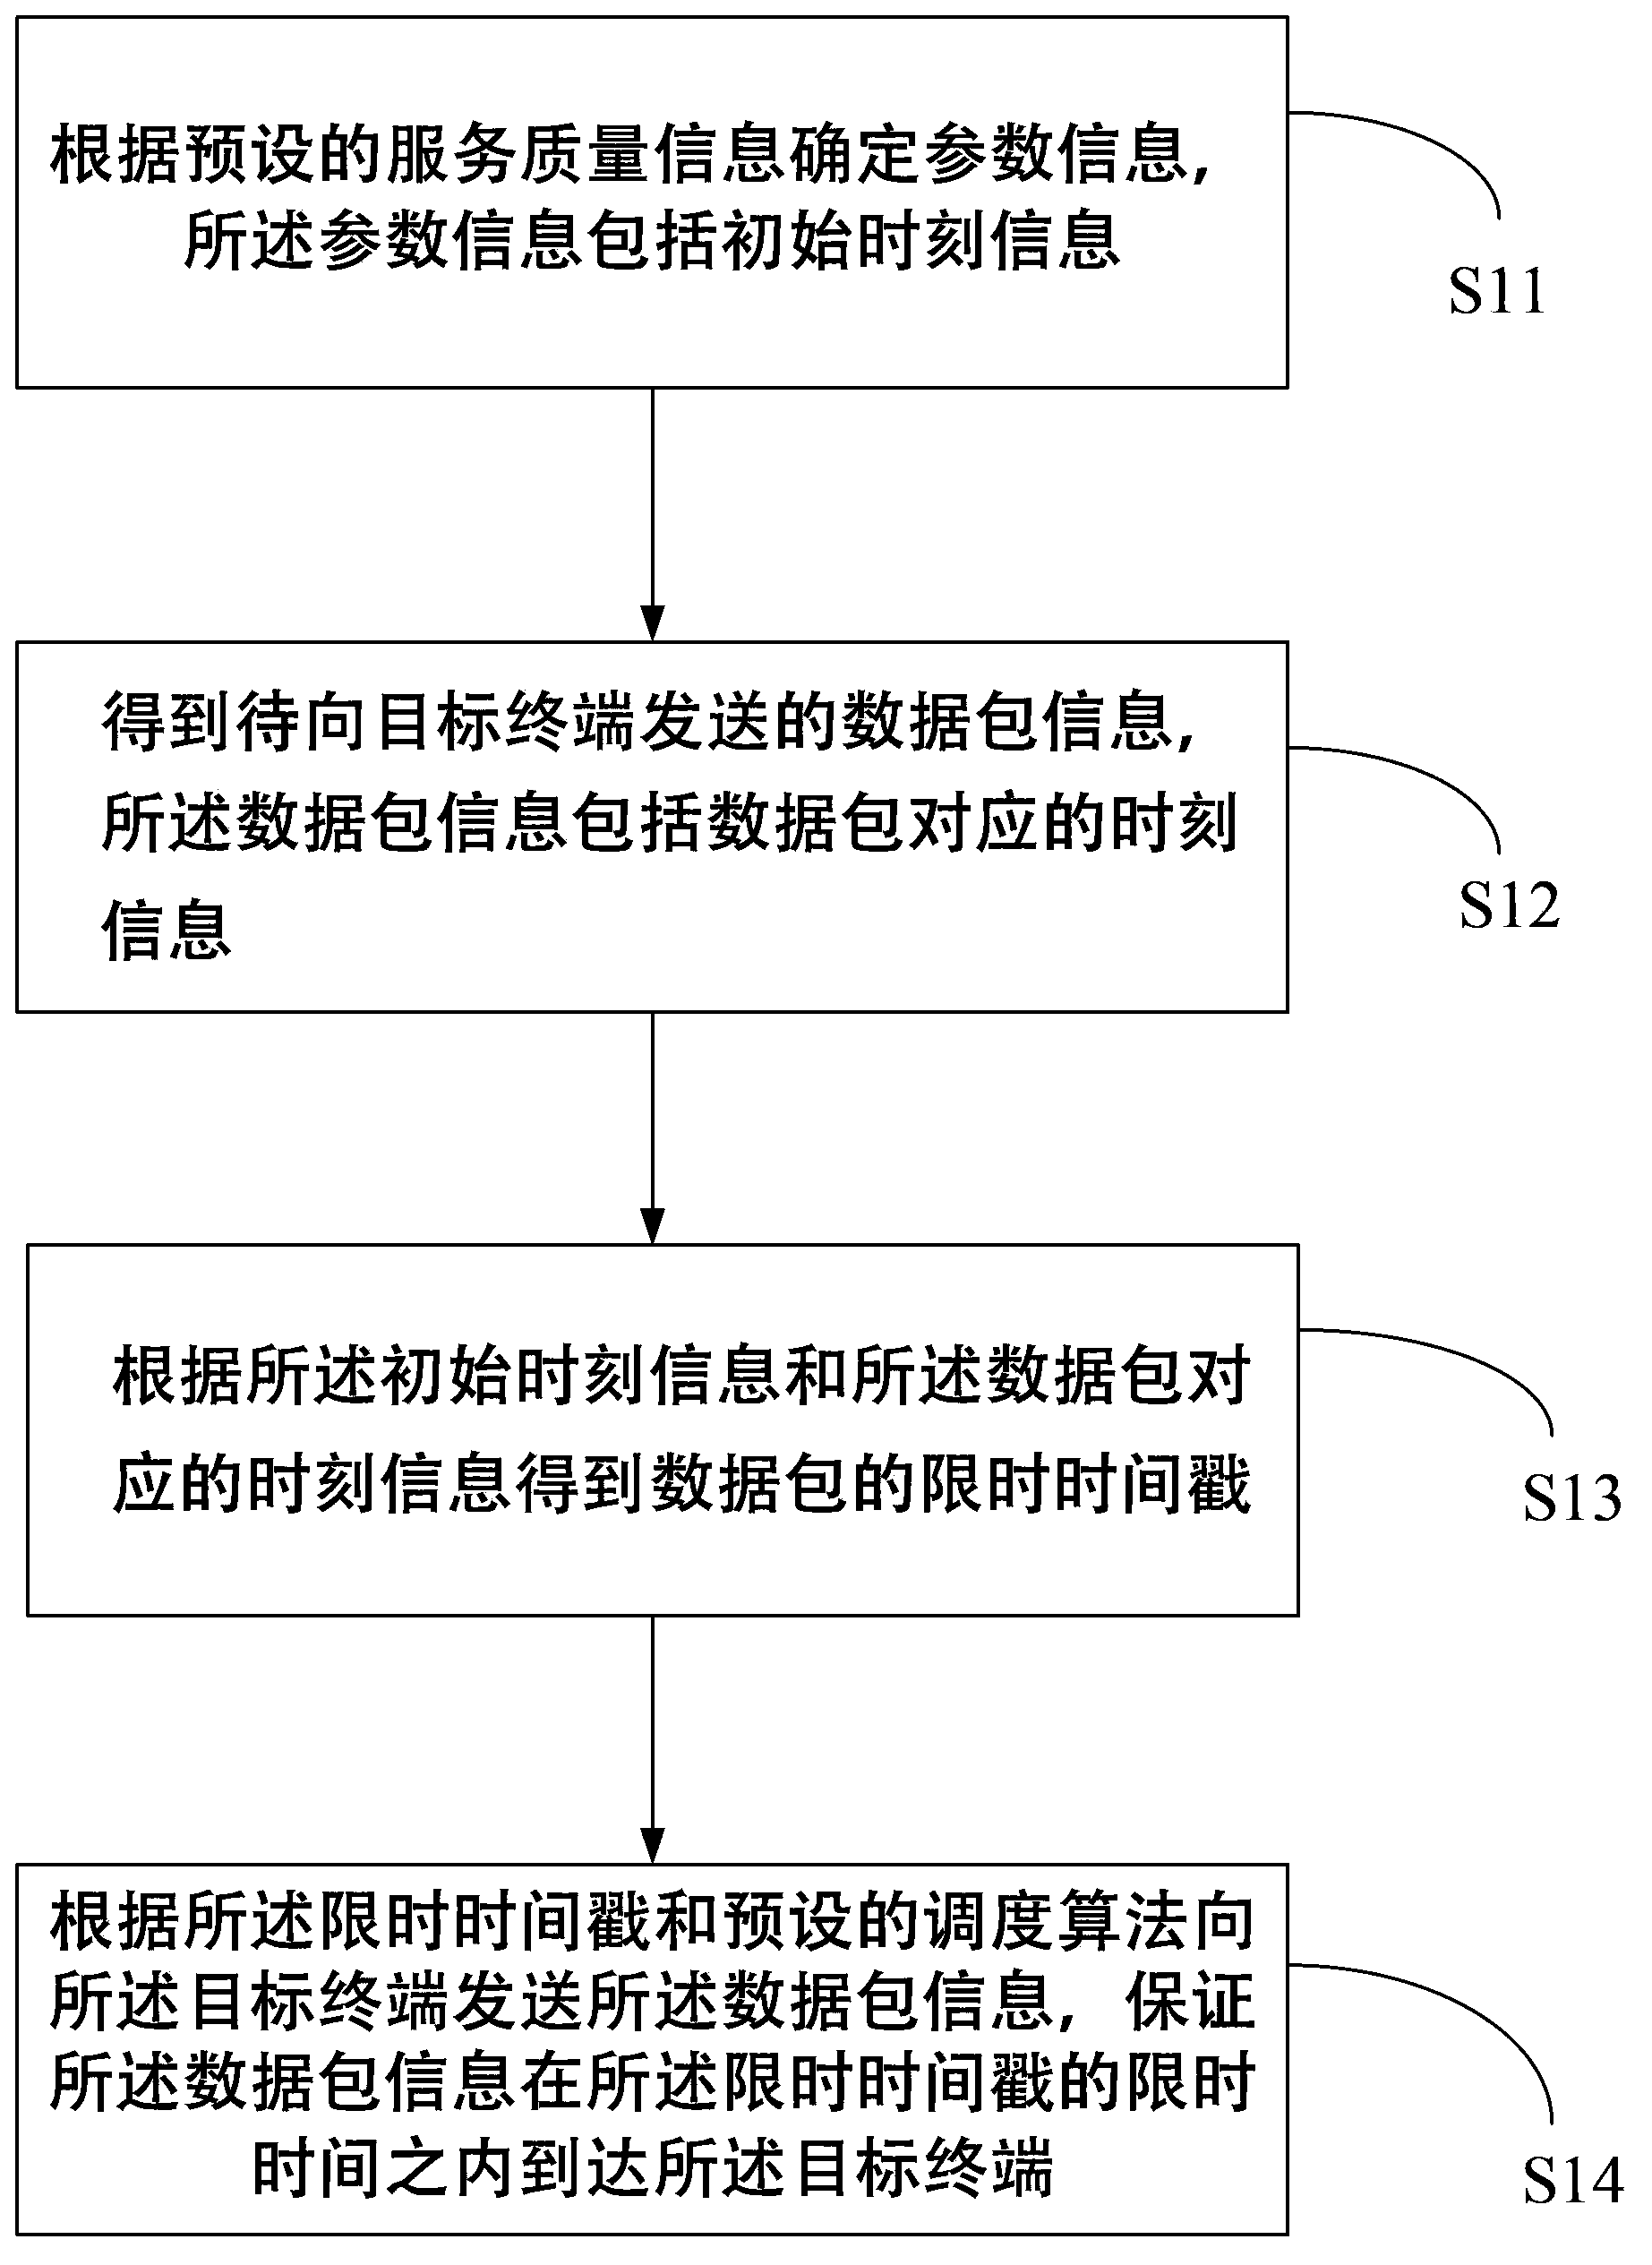 Wireless scheduling method, device and base station guaranteeing time delay service quality